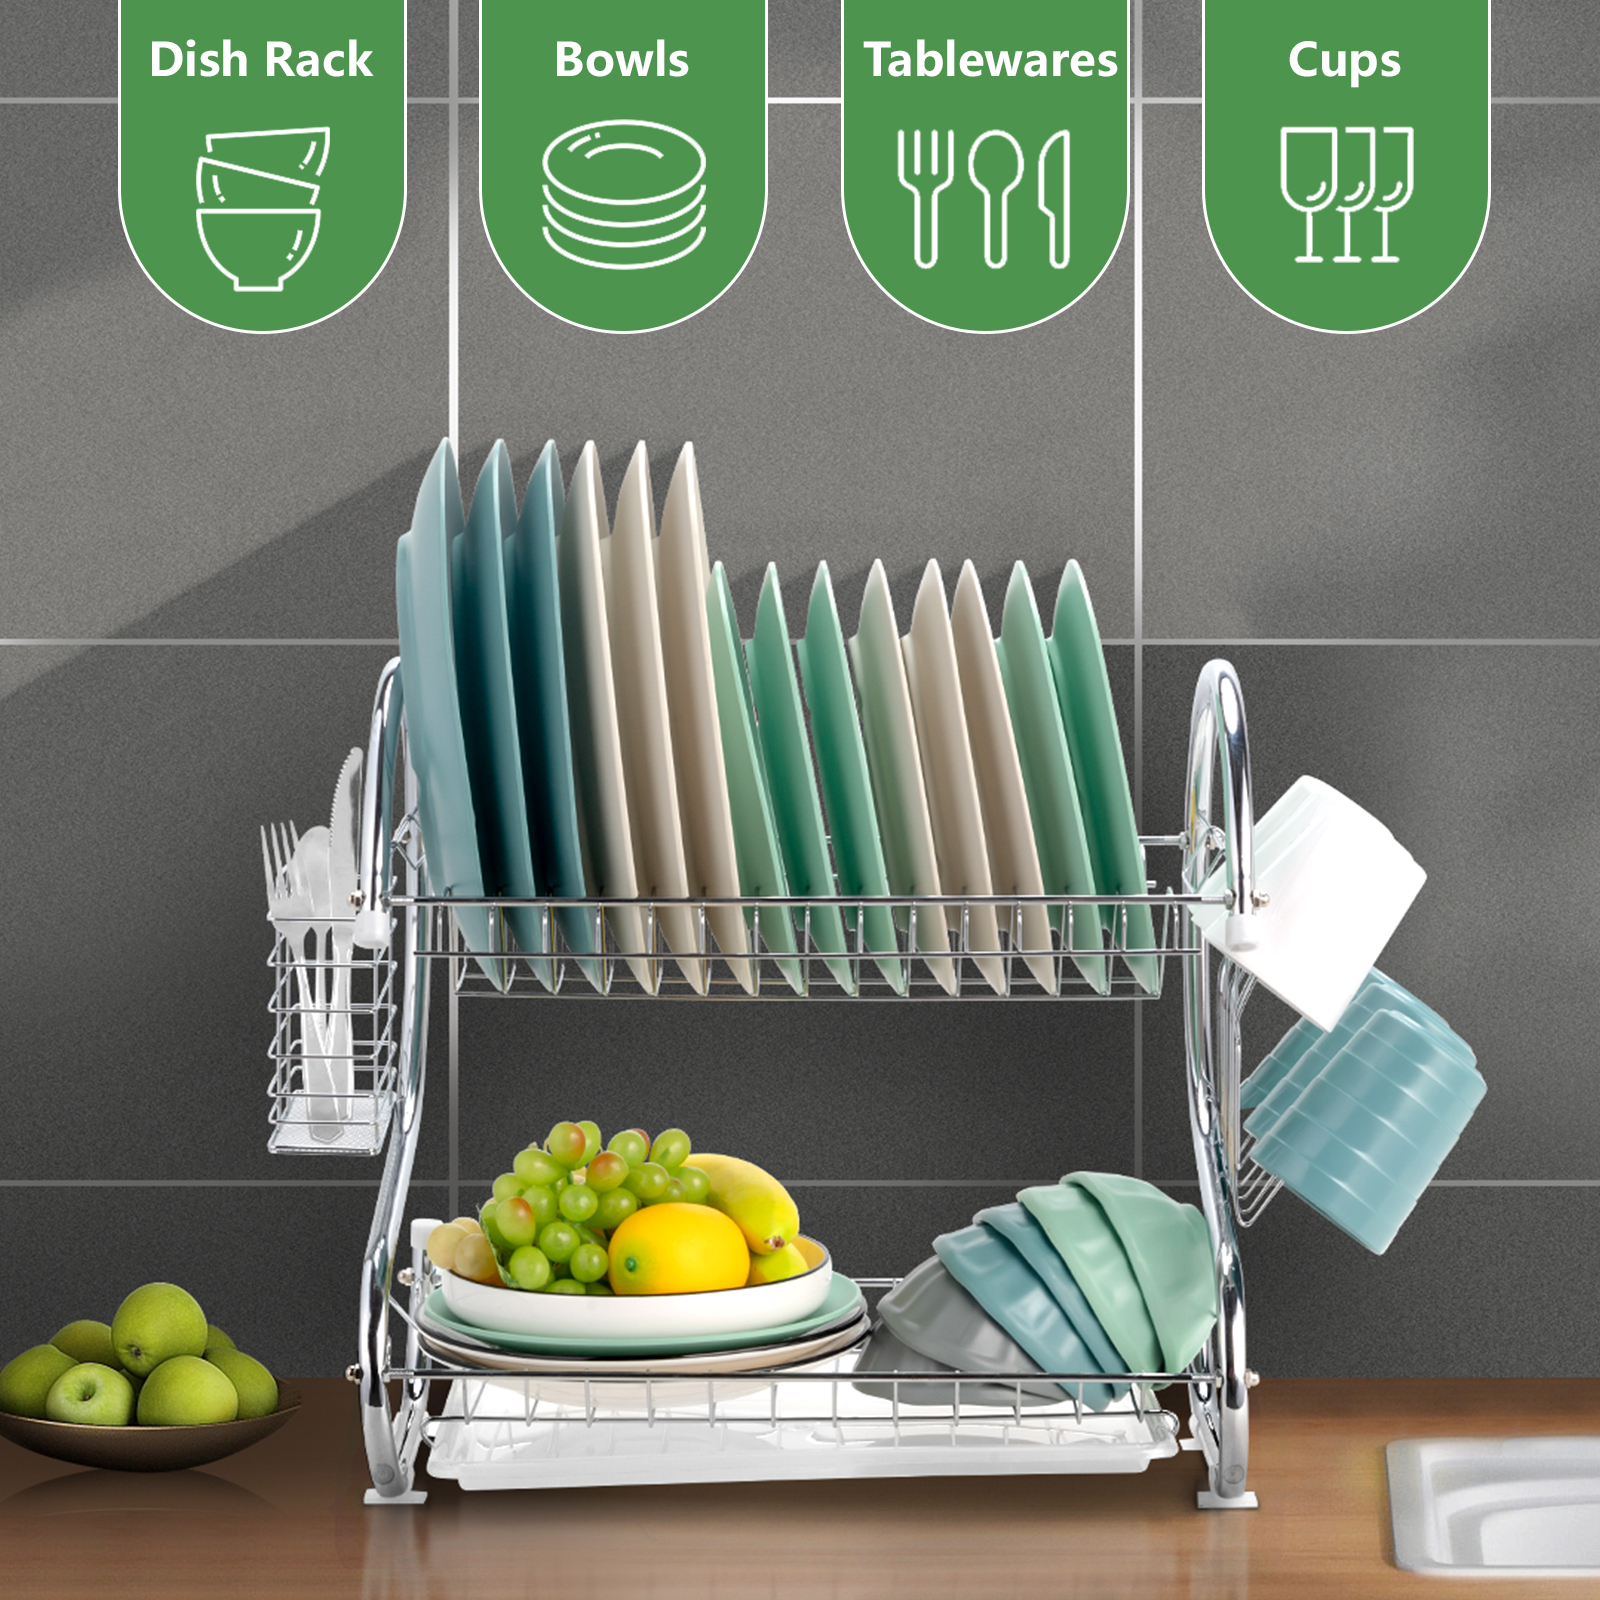 Ktaxon Kitchen Stainless Steel Dish Cup Drying Rack Holder 2-Tier Dish Rack Sink Drainer - image 5 of 11